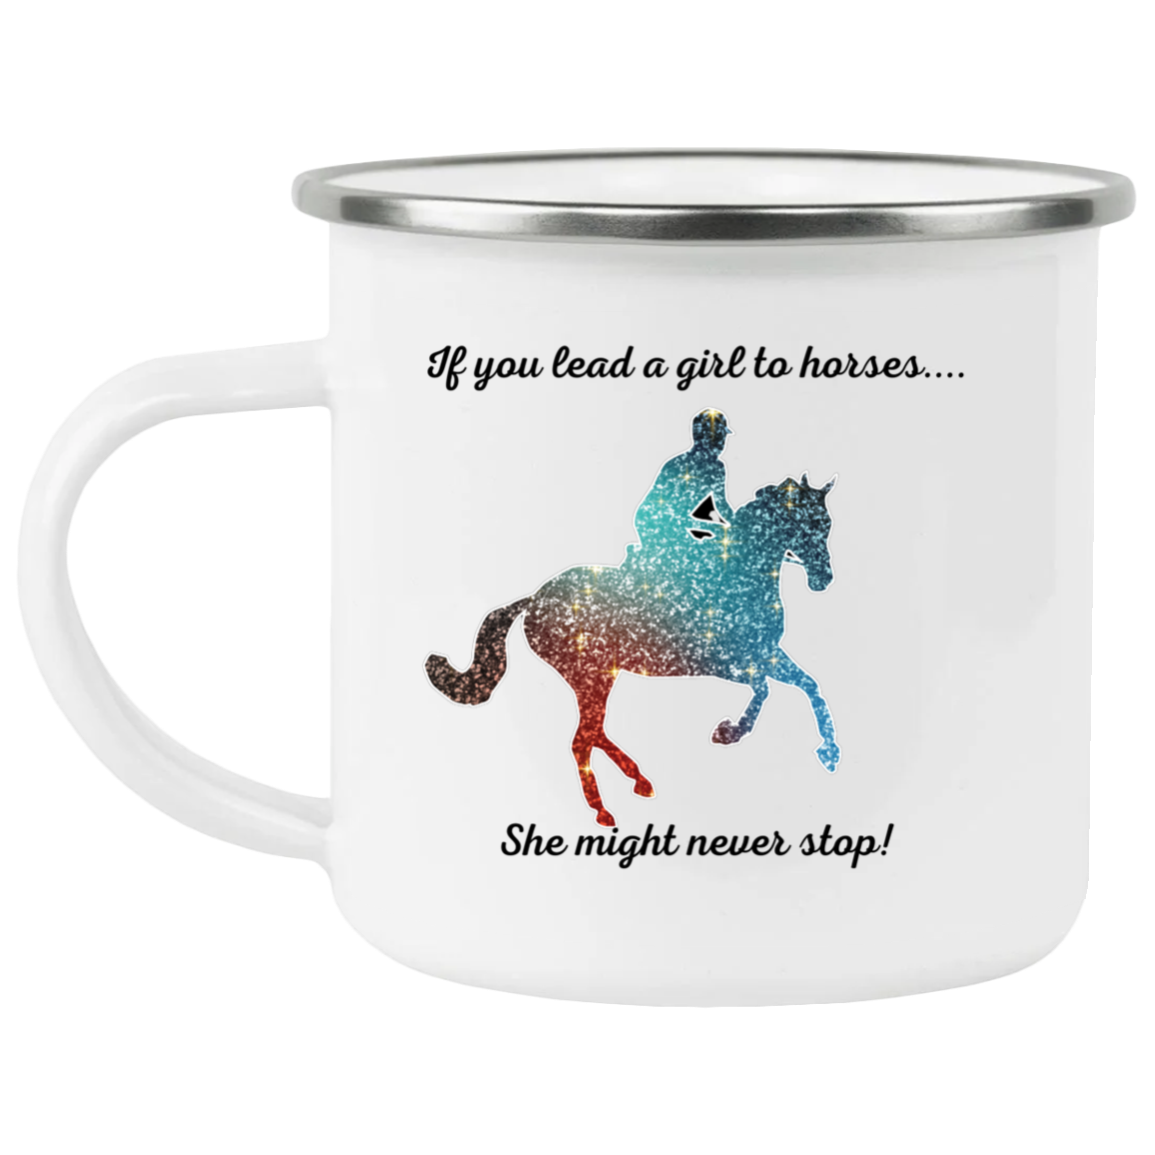 Lead a Girl To Horses... Mug For Camping